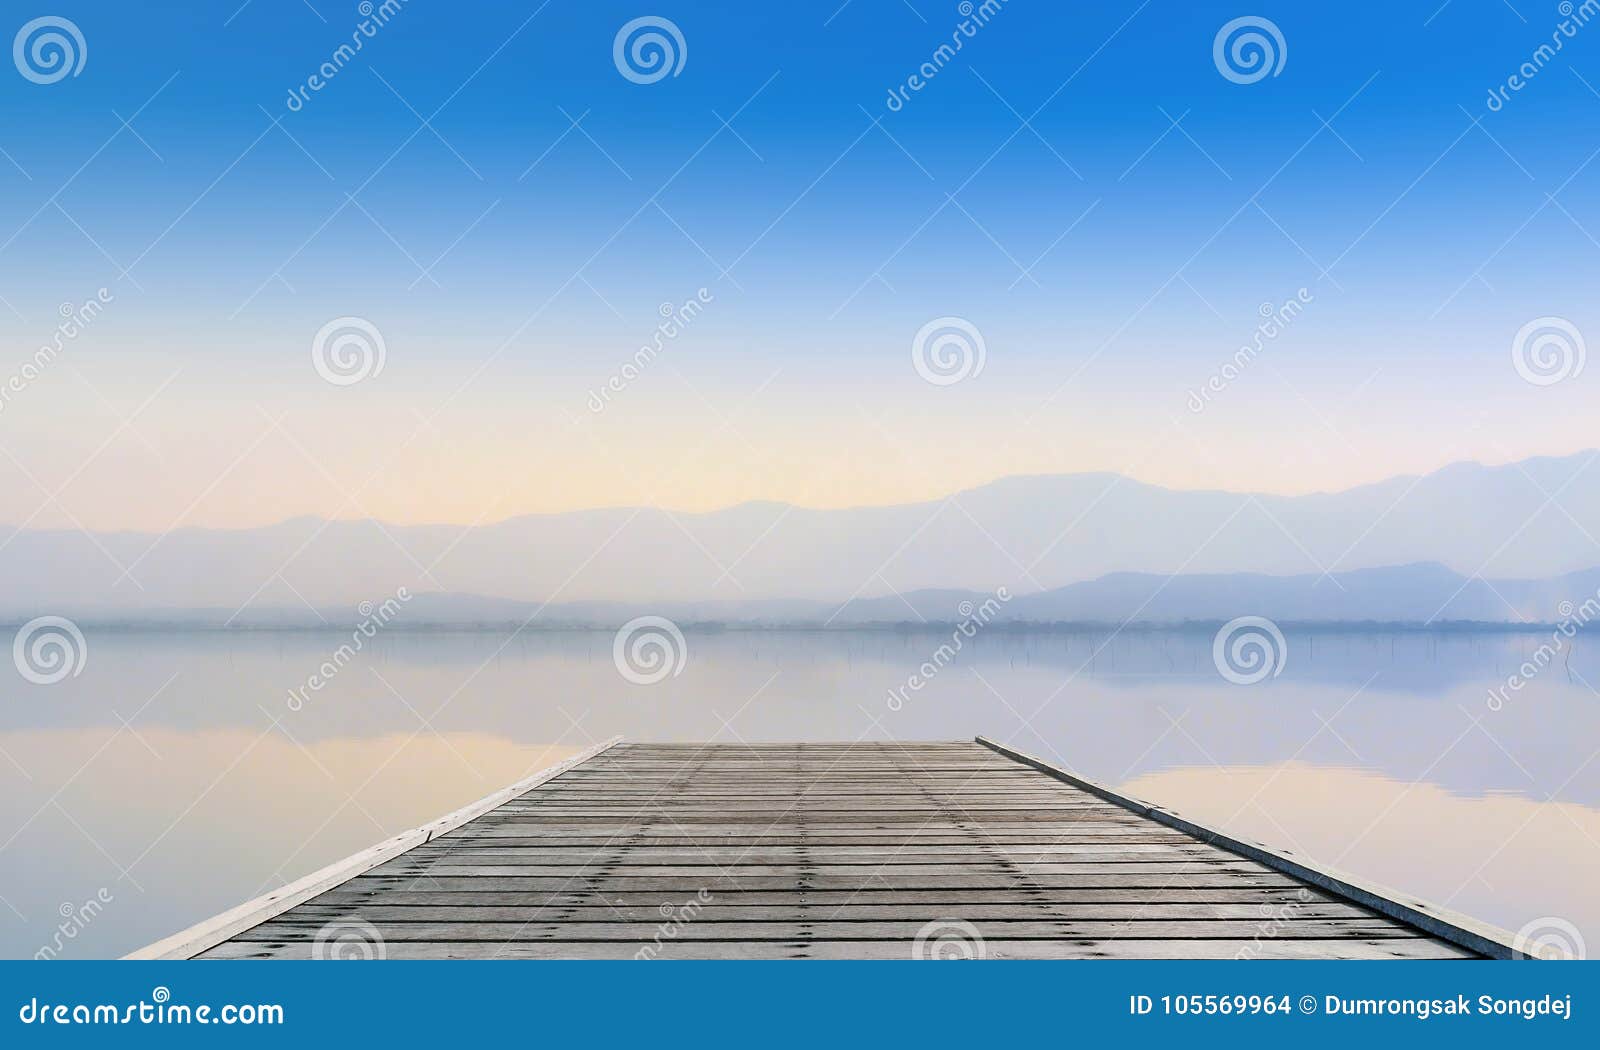 calmness lake with mountain in sunset